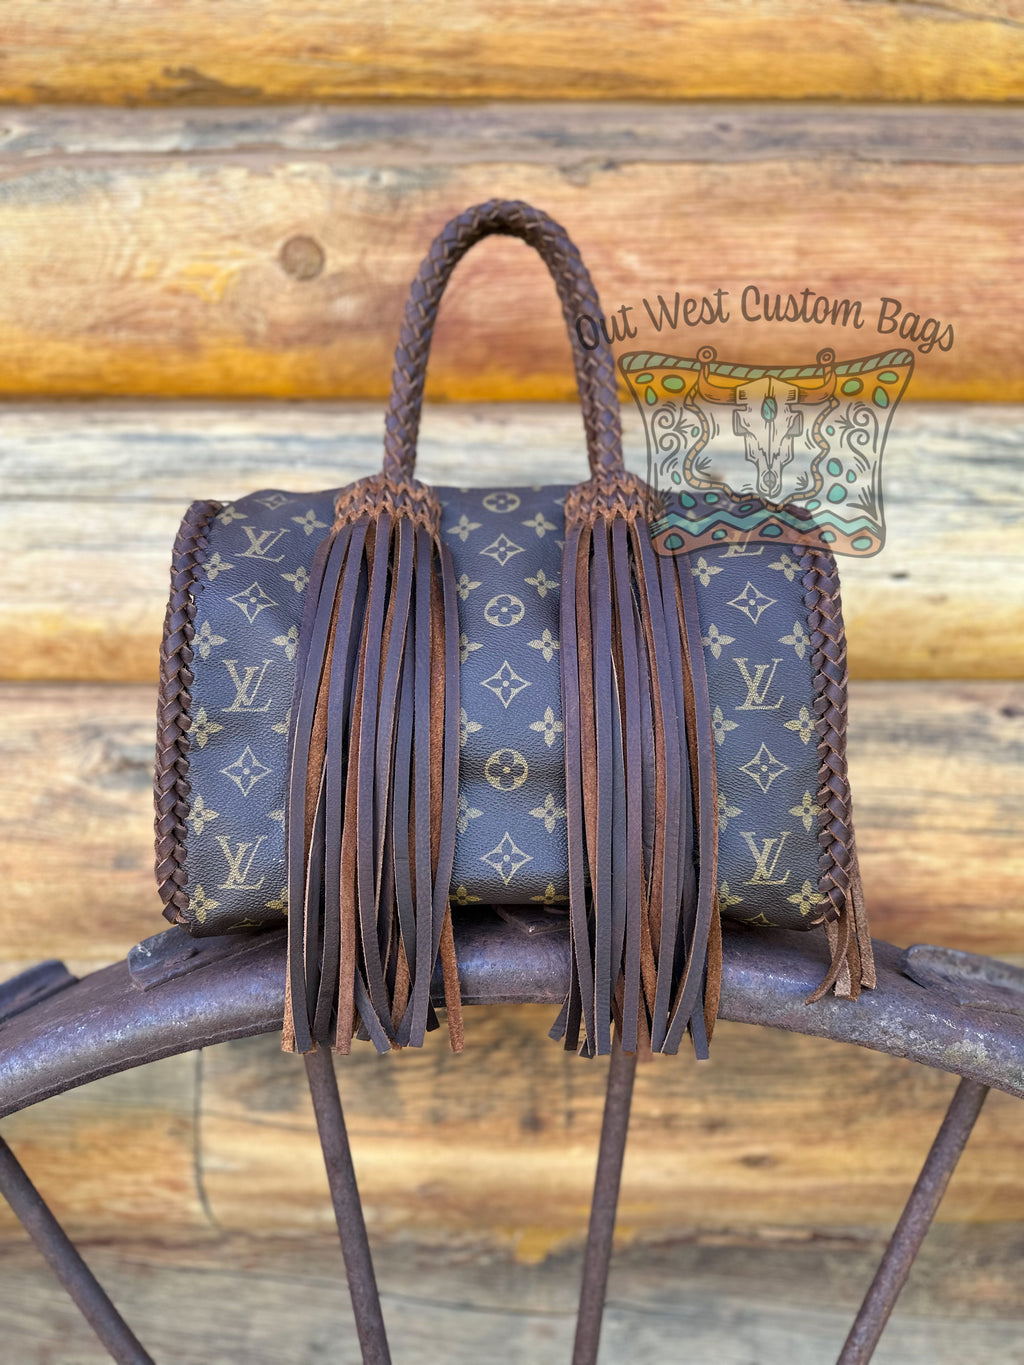 Out West Speedy 30 Revamped with Leather Braiding and Fringe